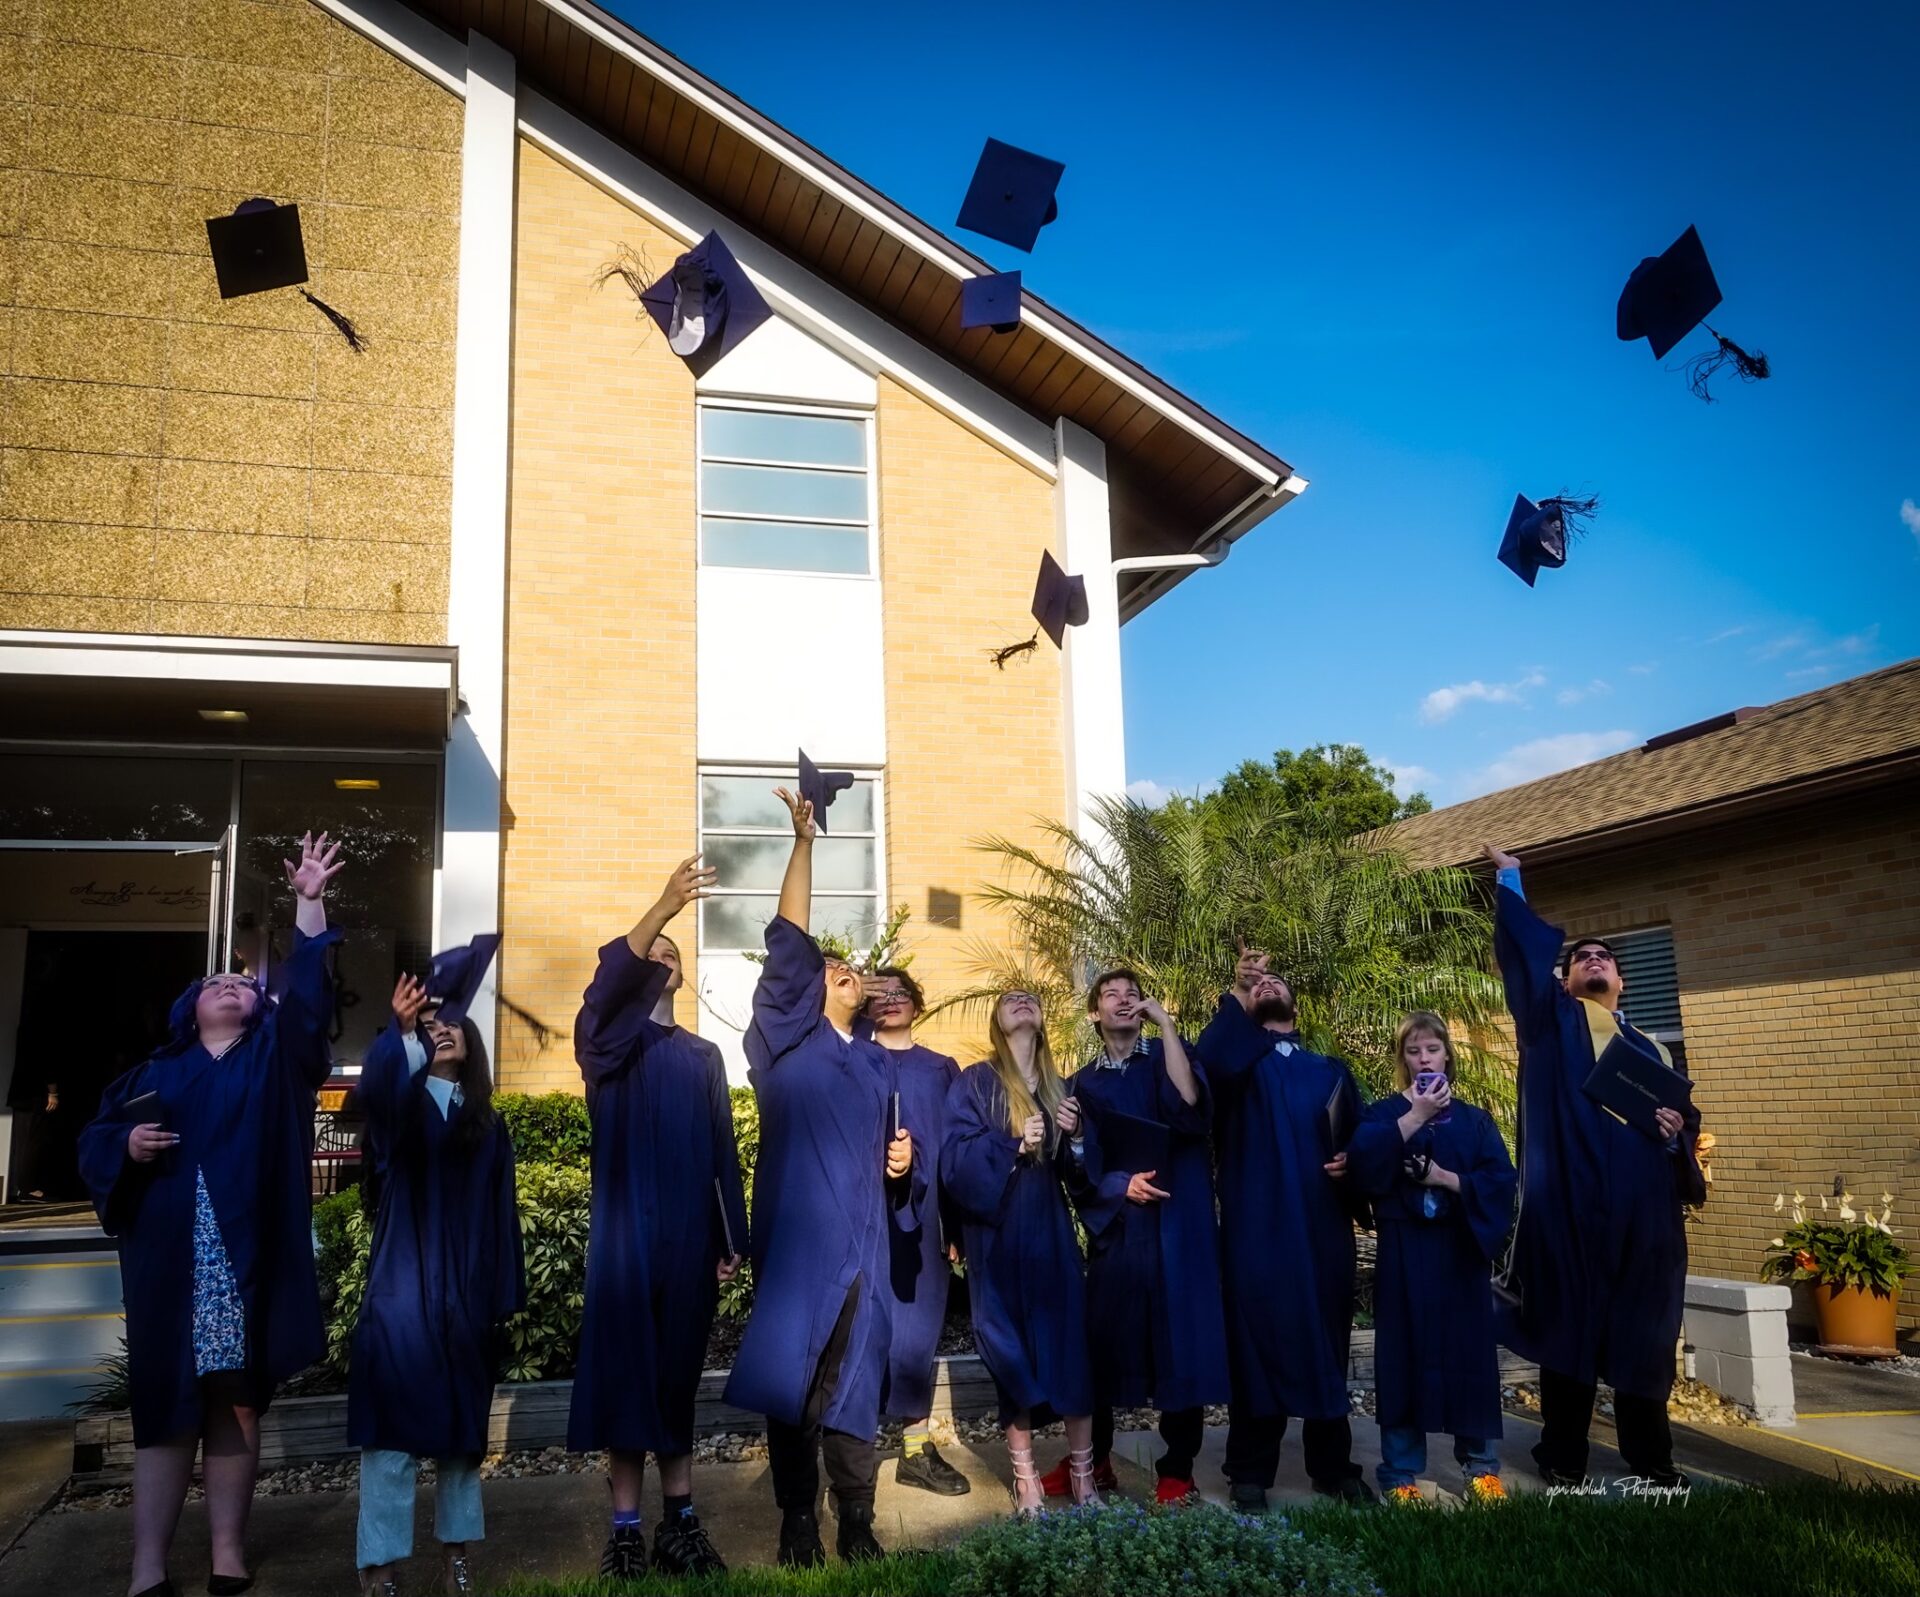 A group of multi-ethnic teenagers are throwing their graduation caps into the air.